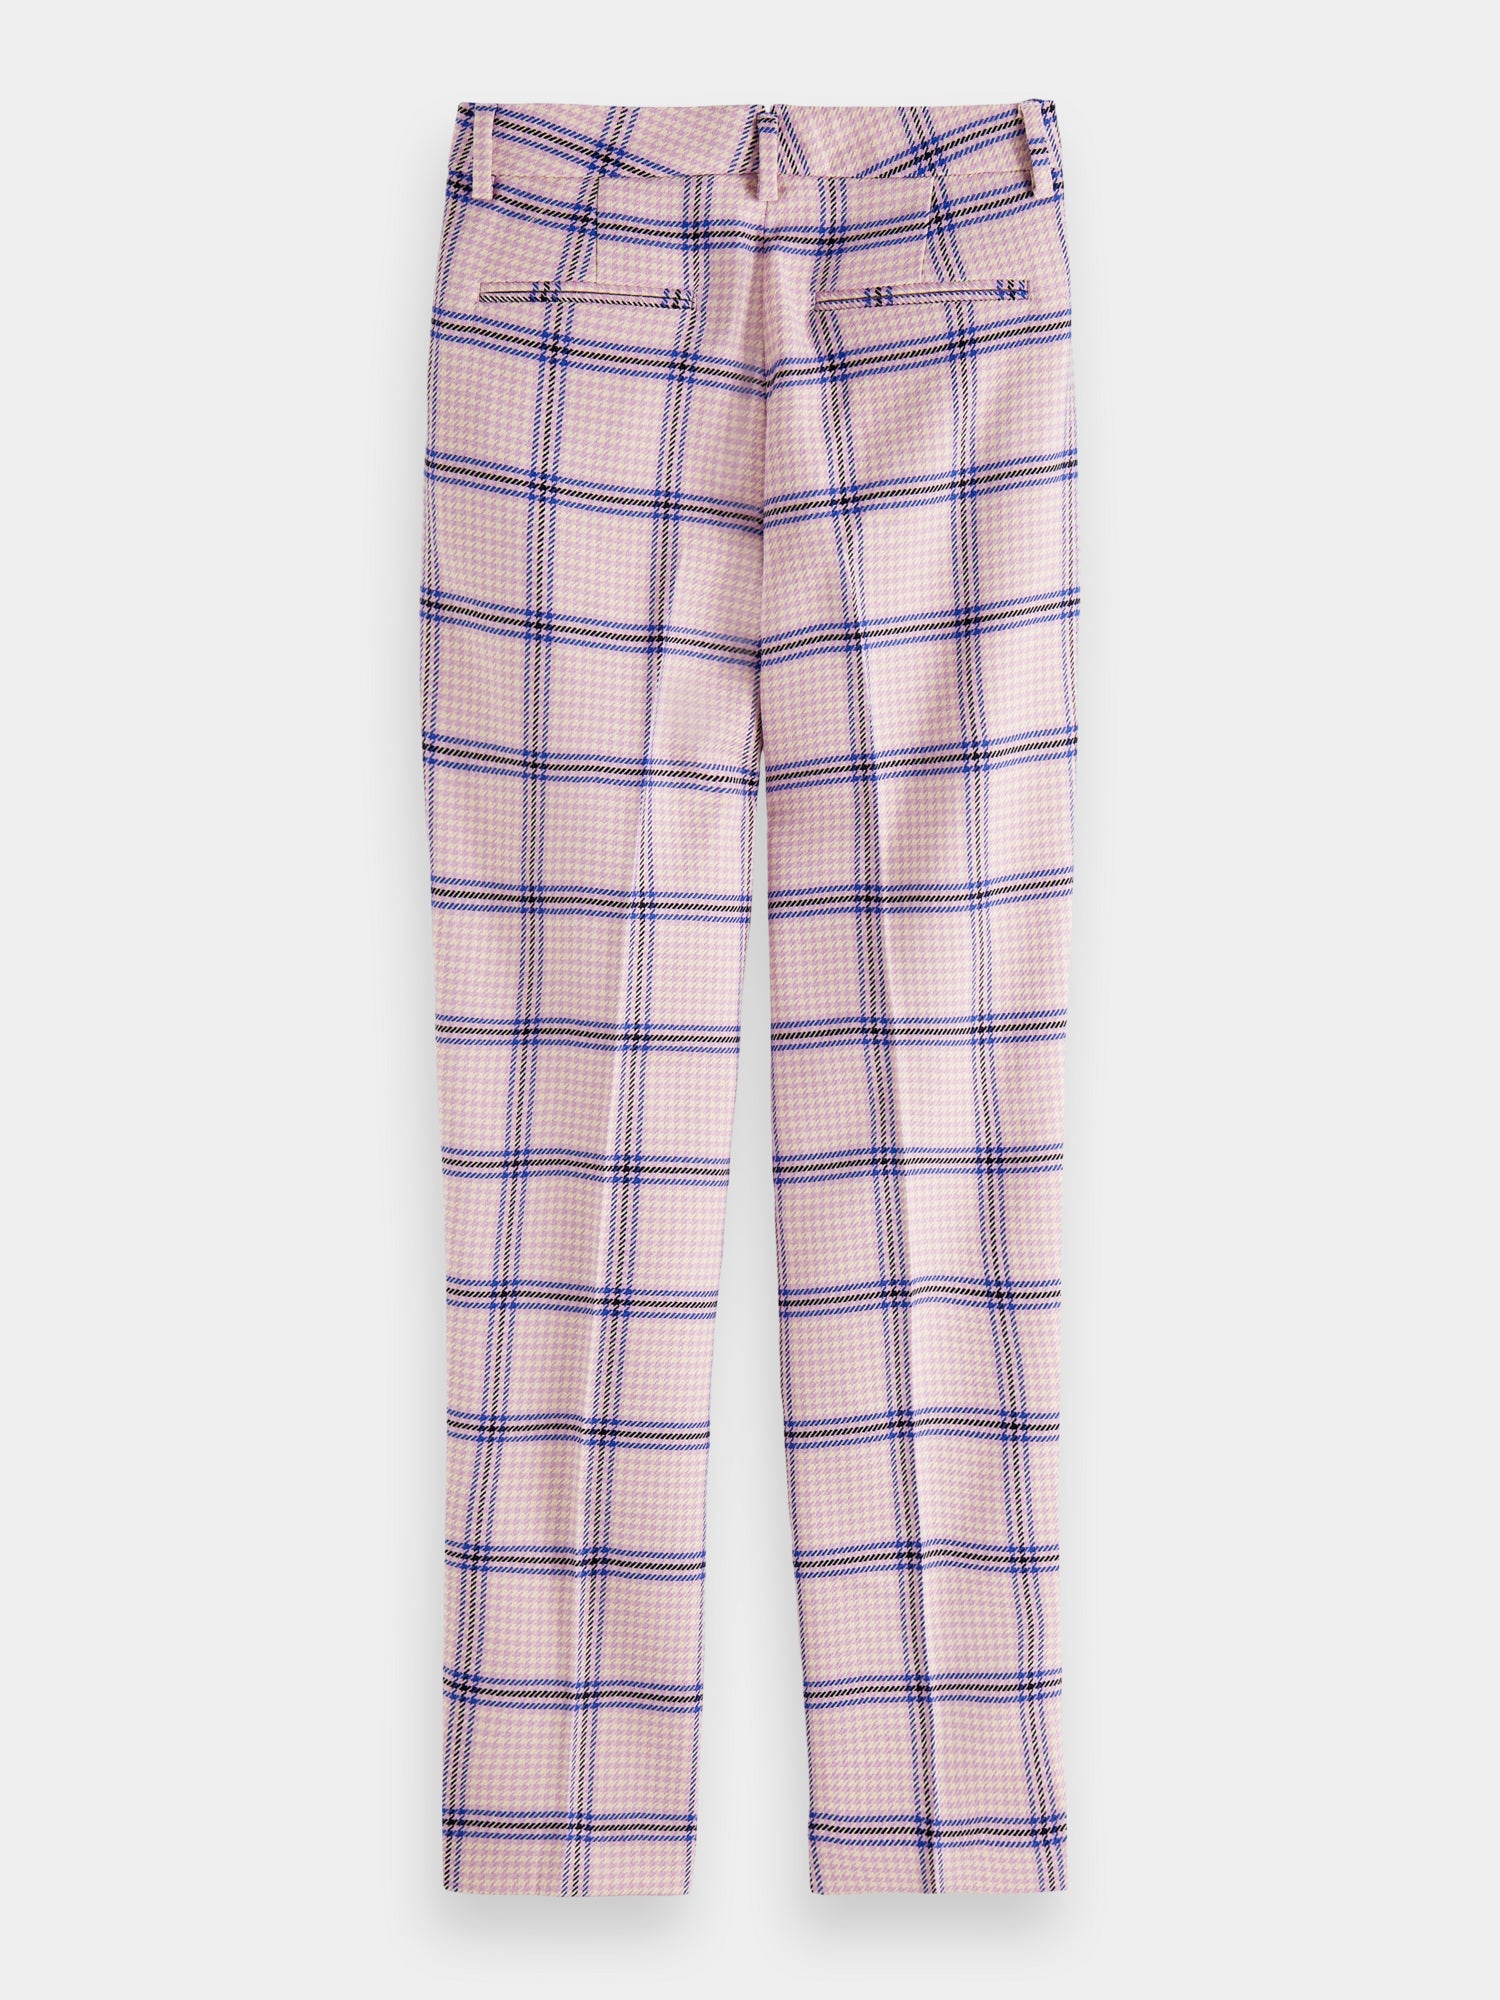 Lowry tailored slim-fit checked trousers | Scotch & Soda NZ